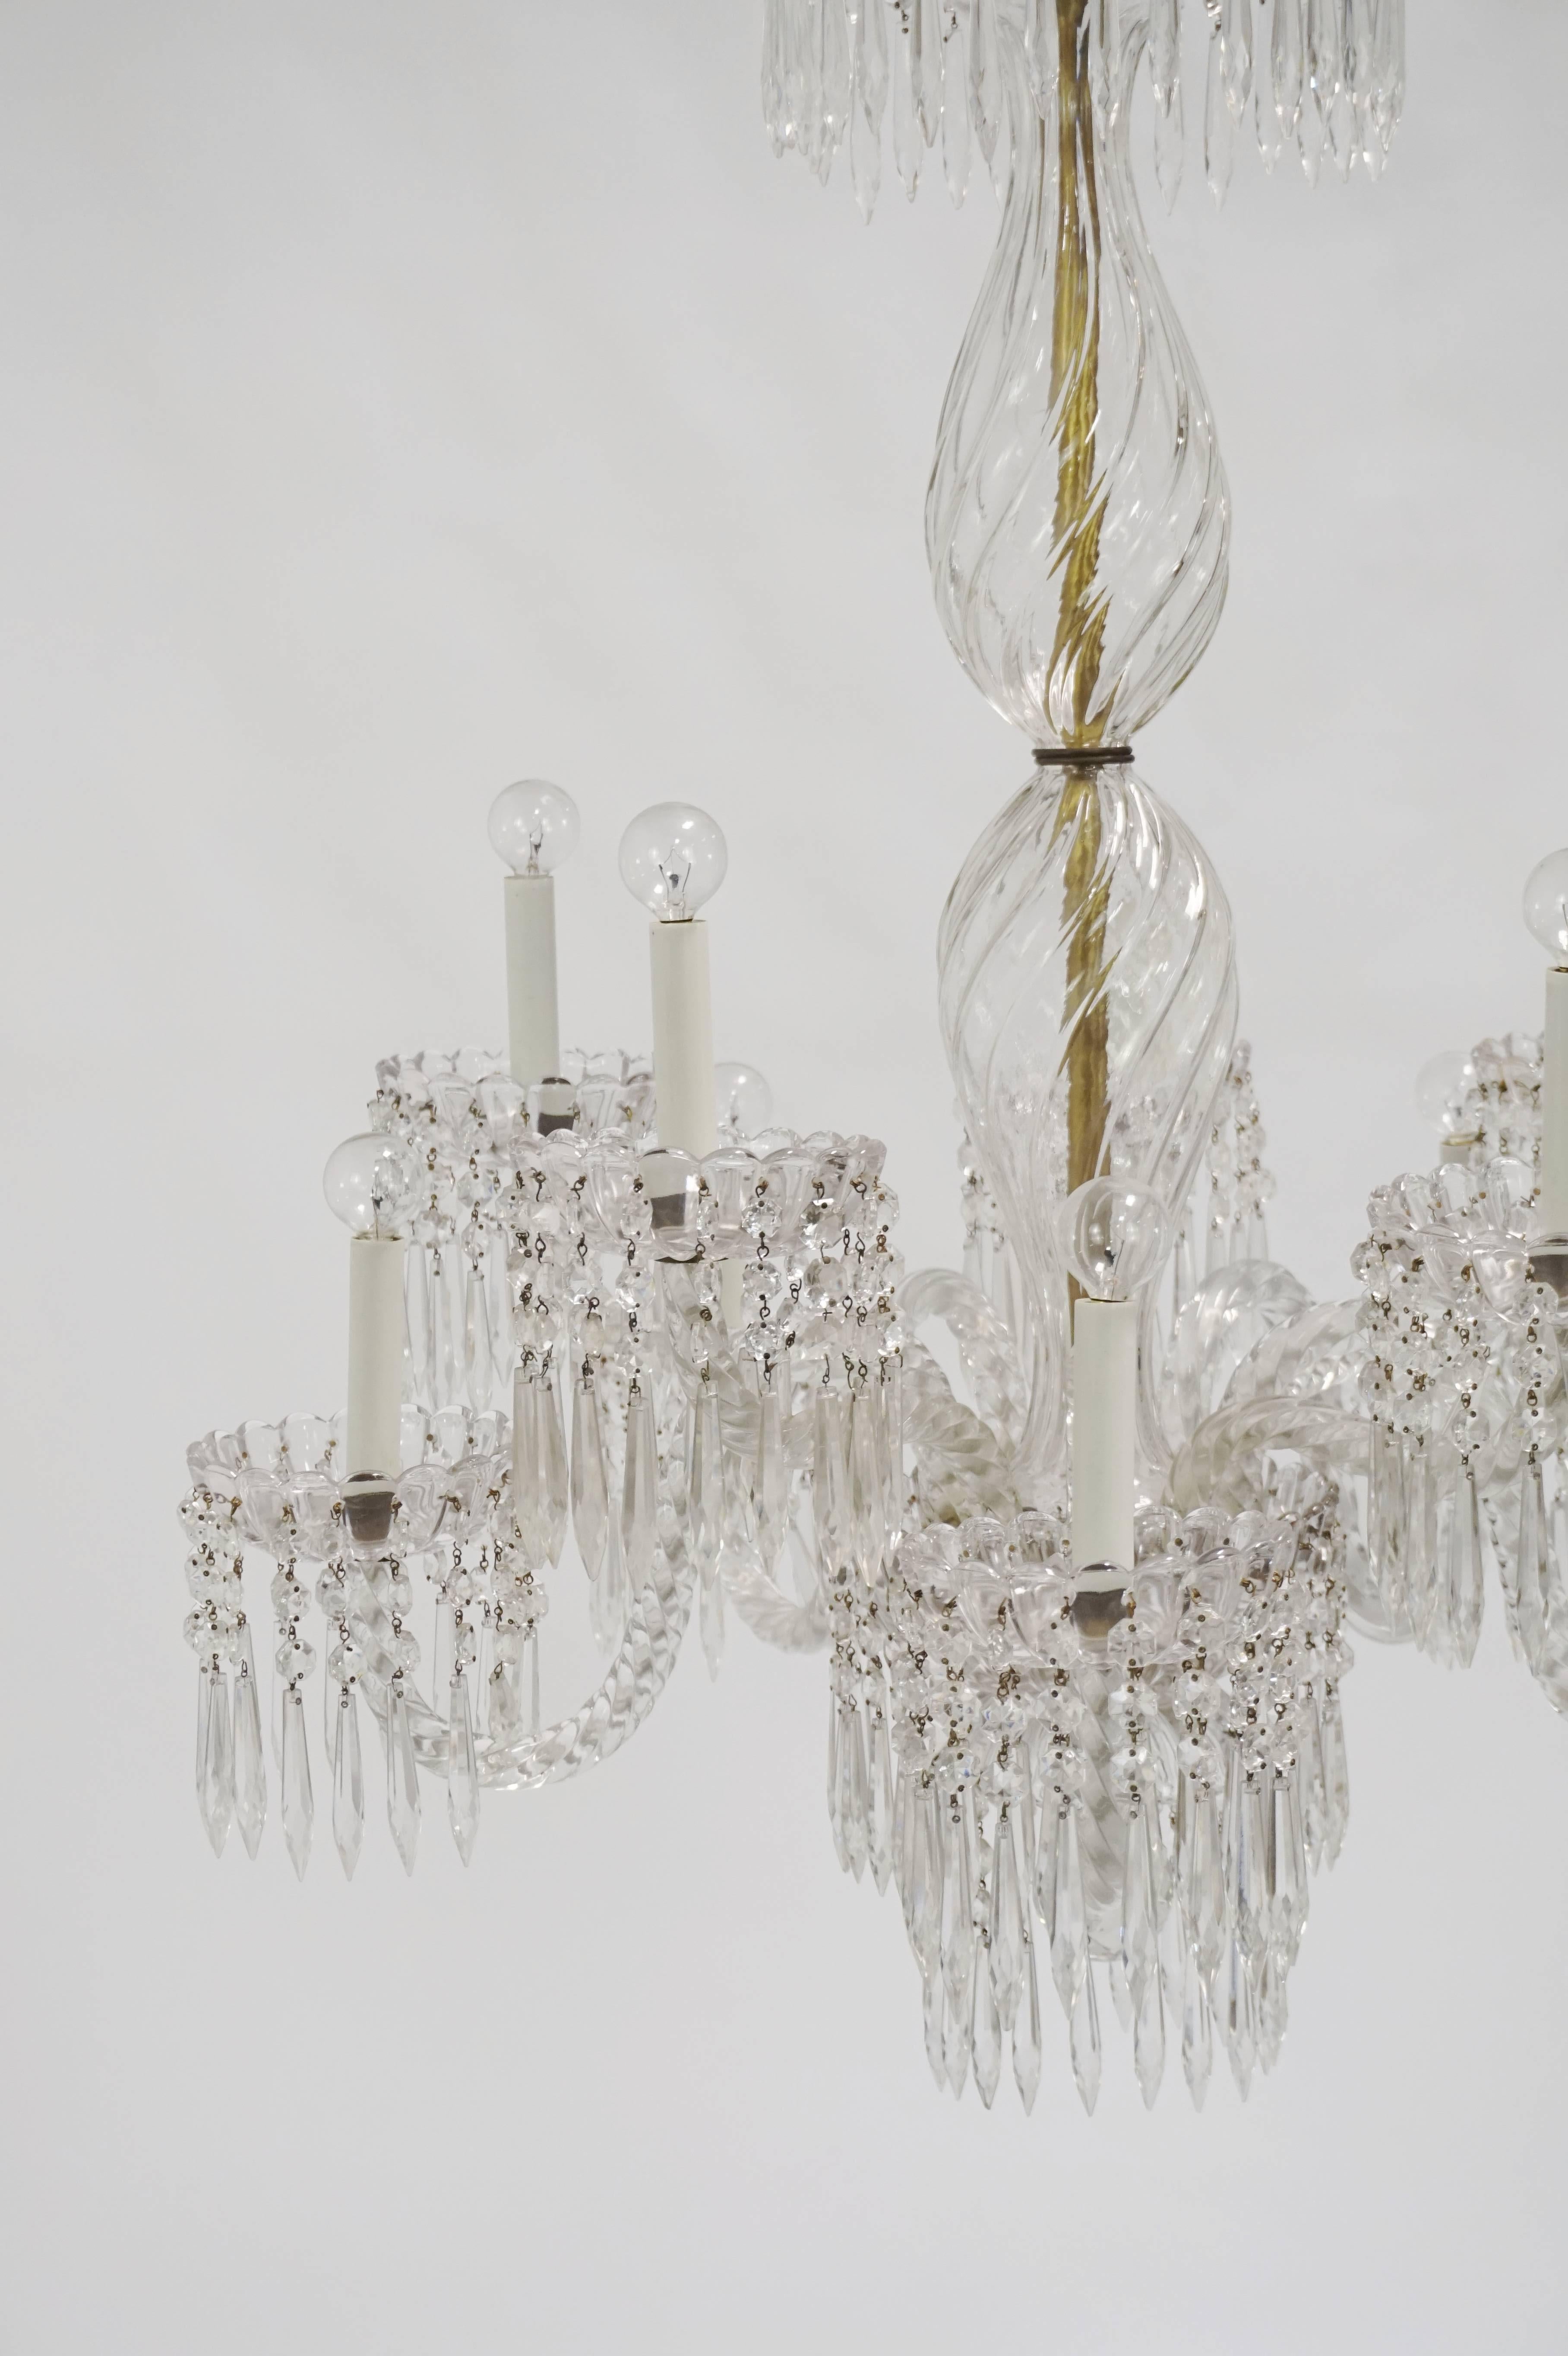 Antique Baccarat Undulating 10-Armed Crystal Waterfalls Chandelier (Kristall)